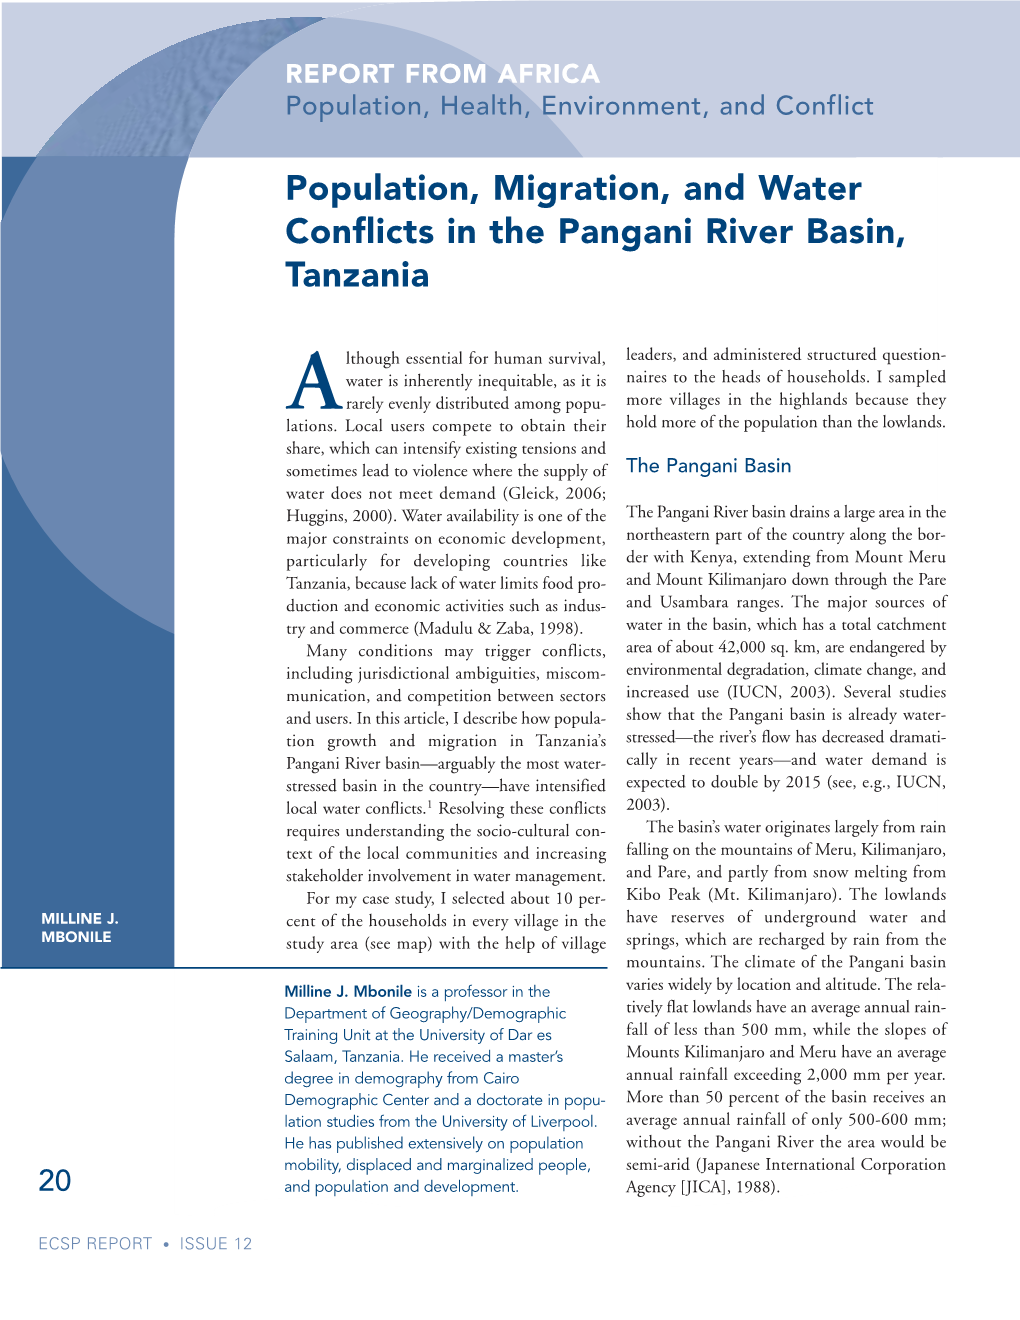 Population, Migration, and Water Conflicts in the Pangani River Basin, Tanzania